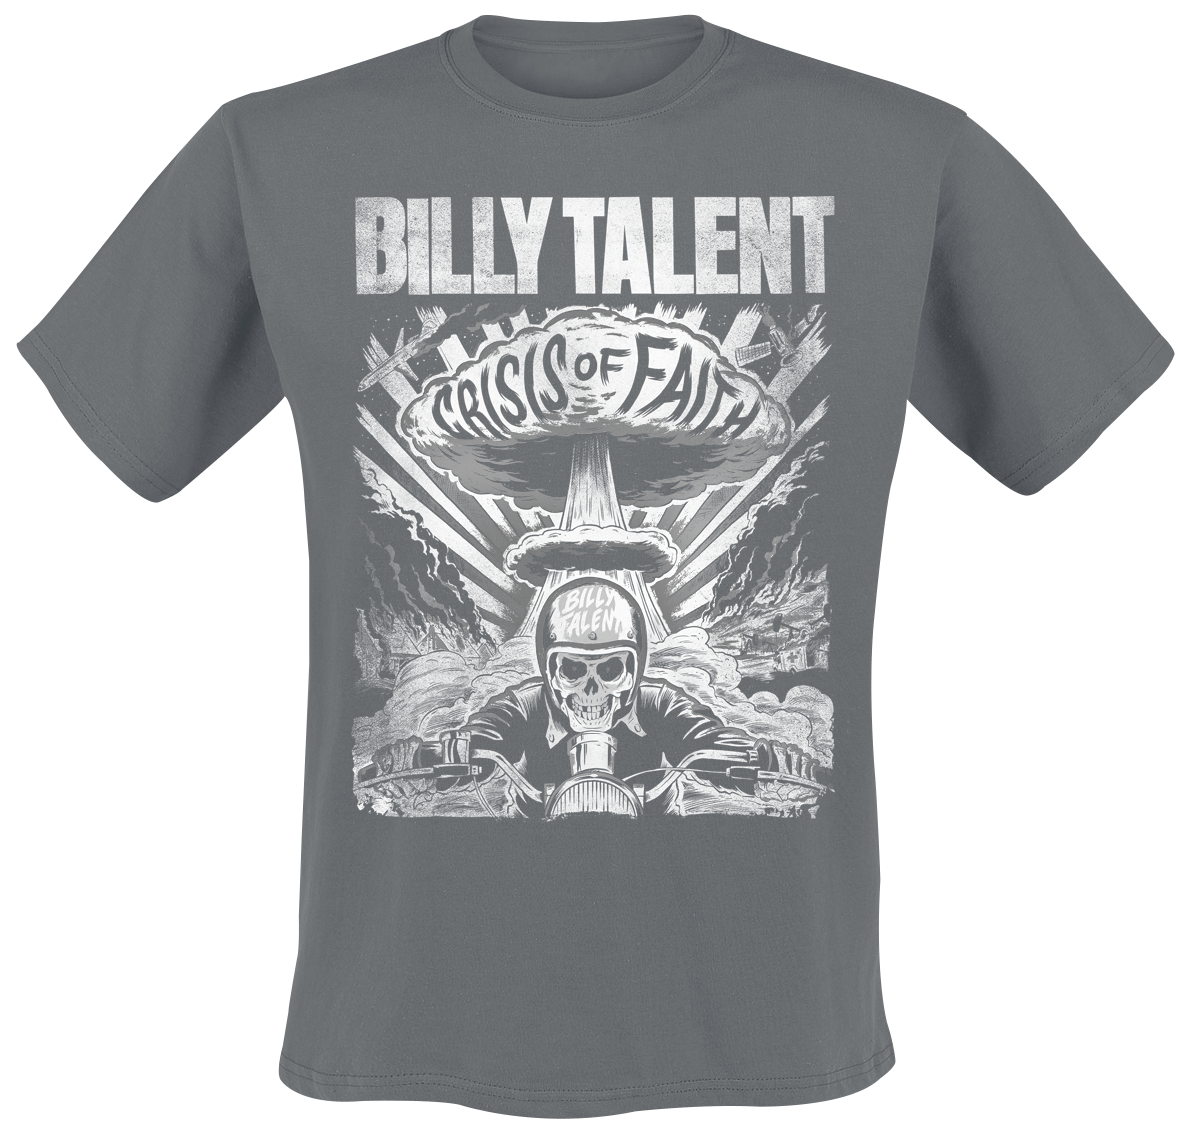 Billy Talent - Crisis Of Faith Cover Distressed - T-Shirt - charcoal